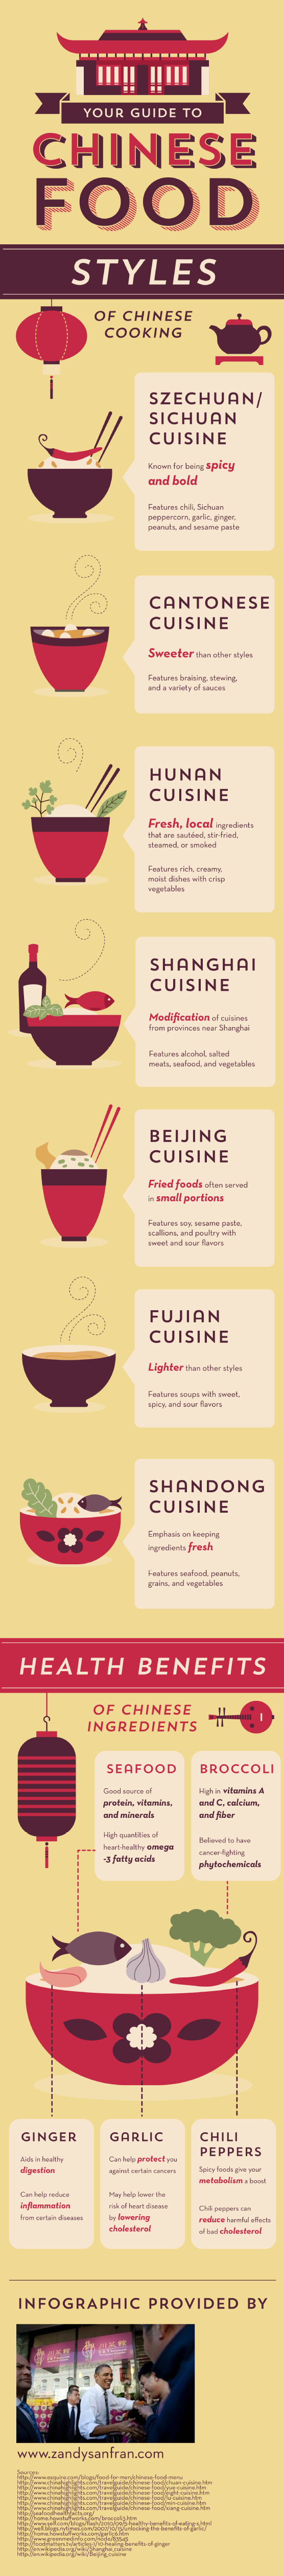 The Differences in Chinese Cuisine